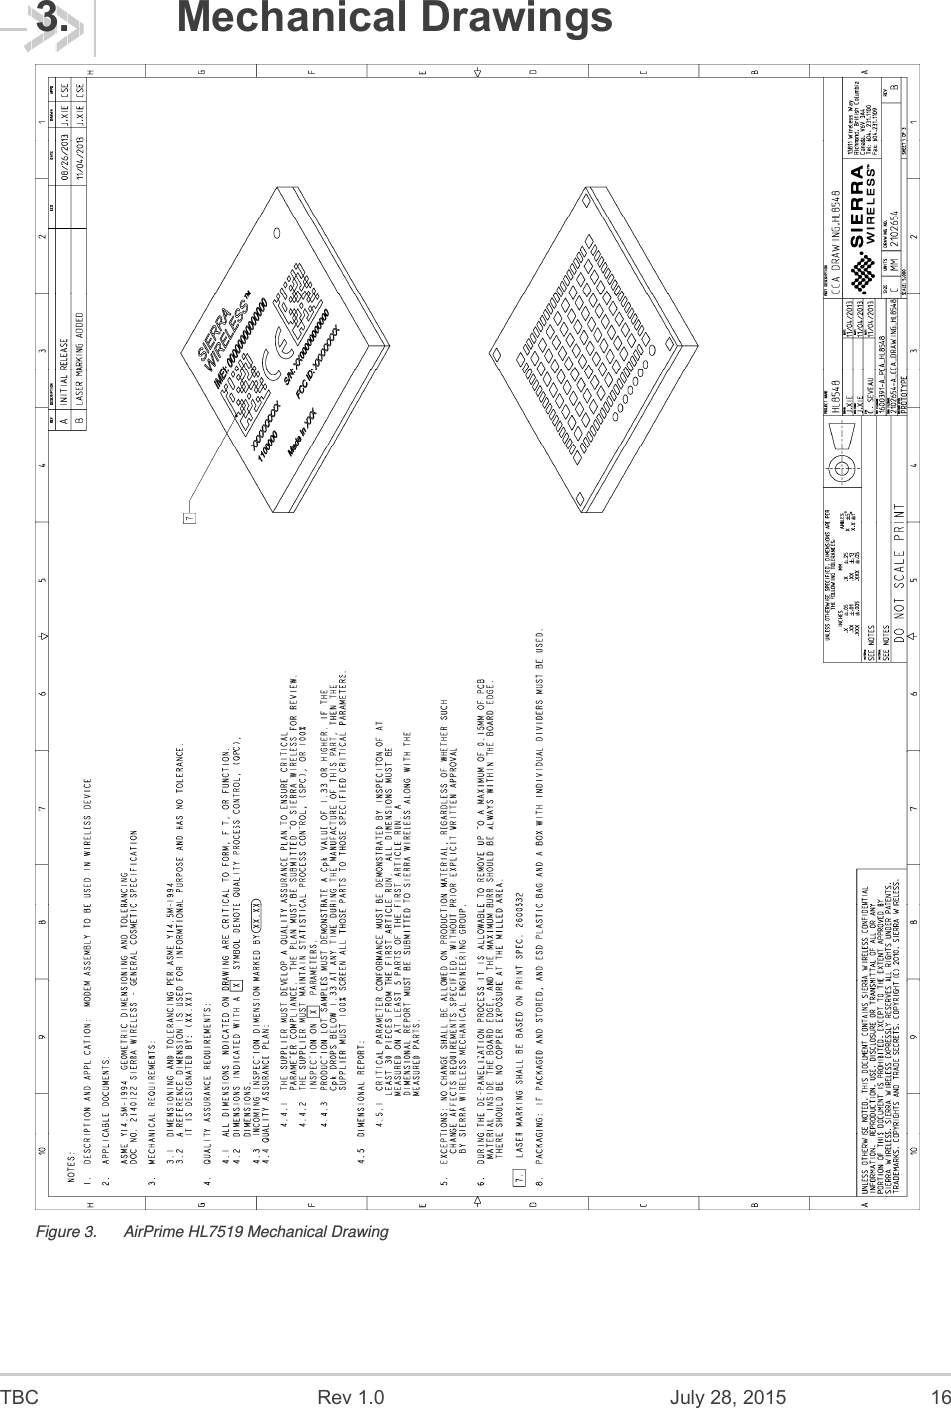  TBC  Rev 1.0  July 28, 2015  16 3.  Mechanical Drawings  Figure 3.  AirPrime HL7519 Mechanical Drawing 